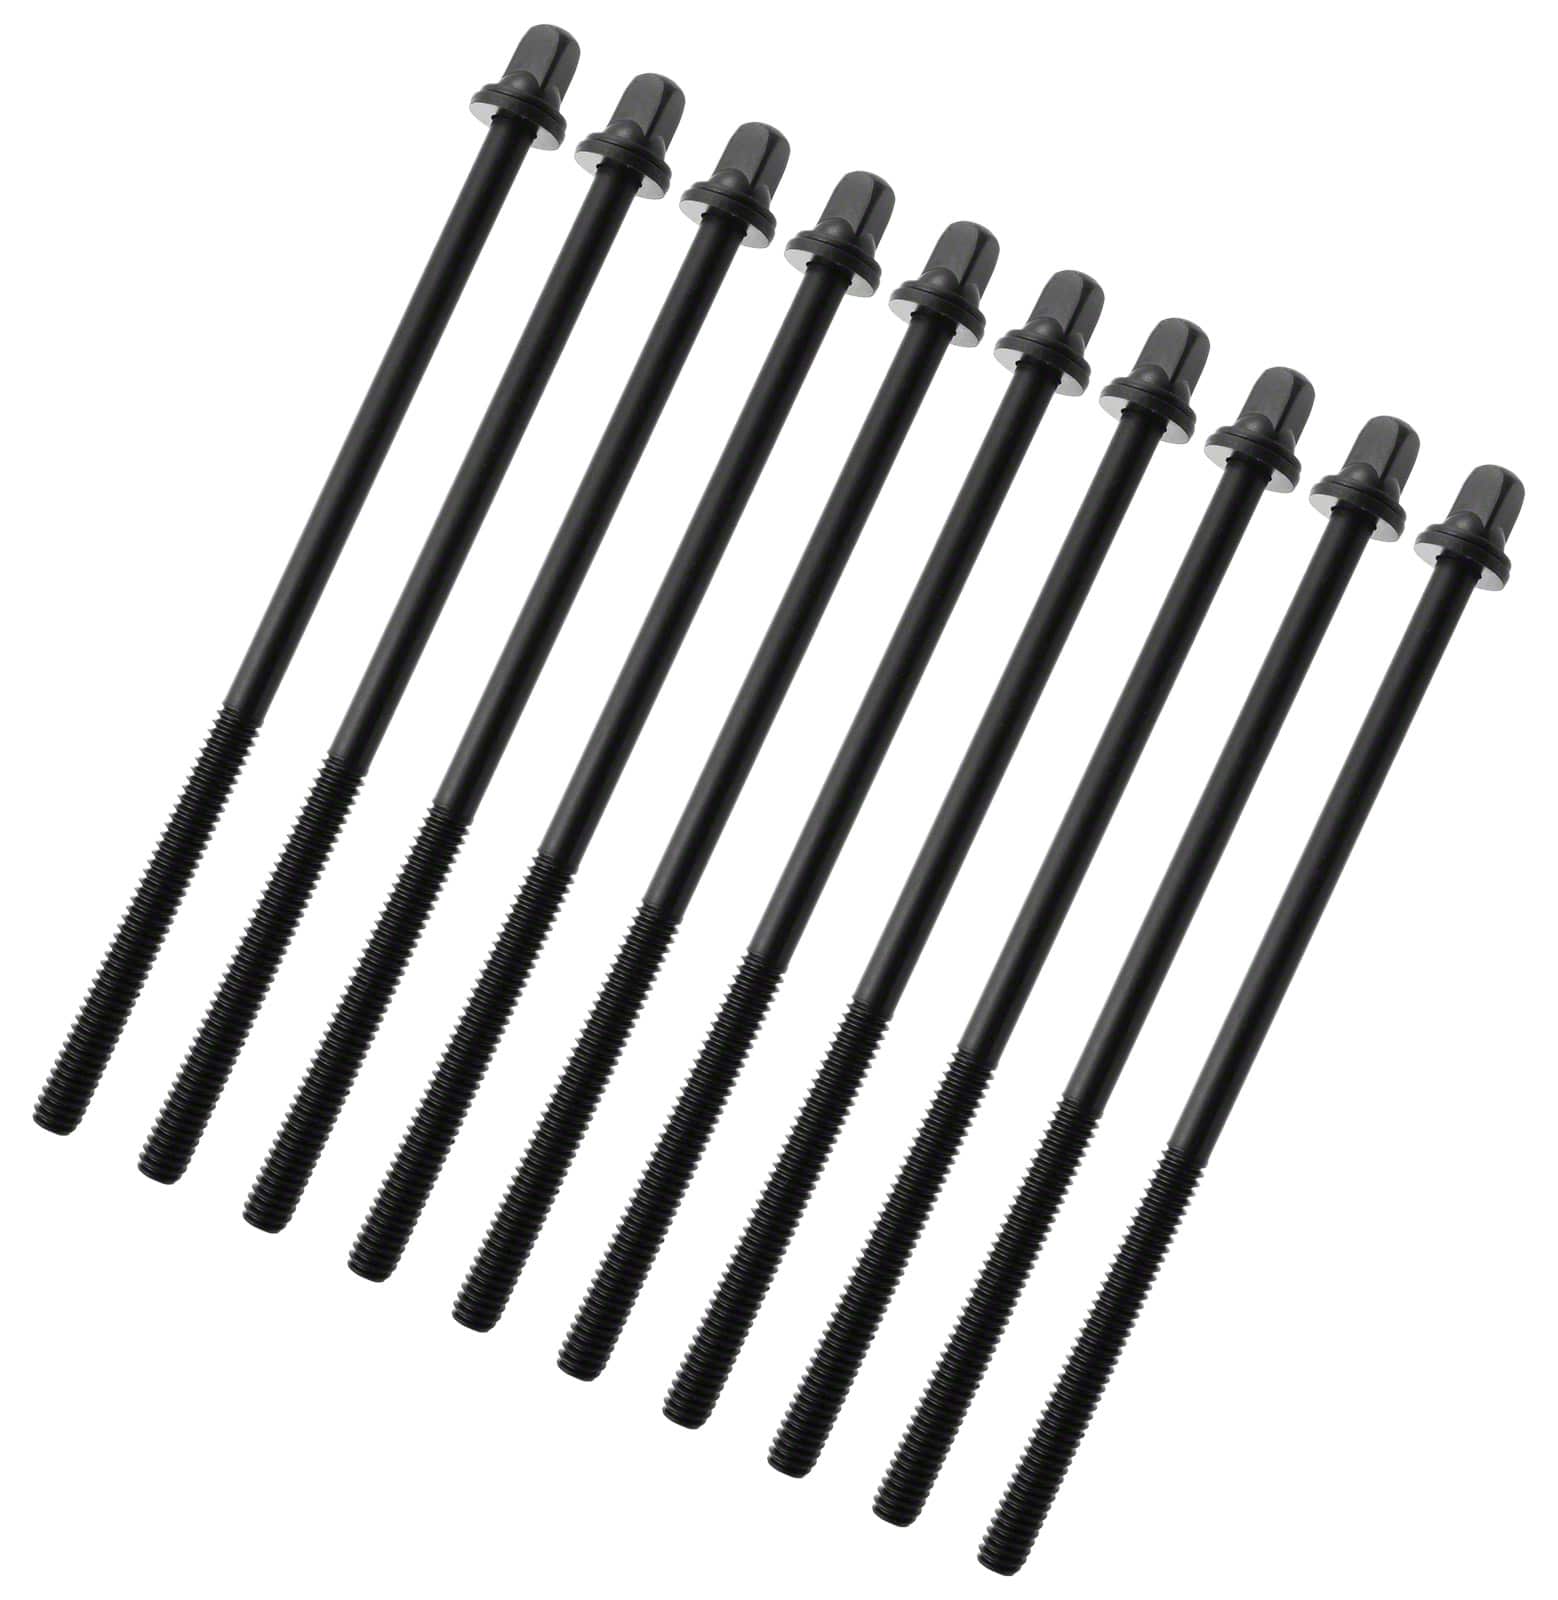 SPAREDRUM TRC-115W-BK - 115MM TENSION ROD BLACK WITH WASHER - 7/32